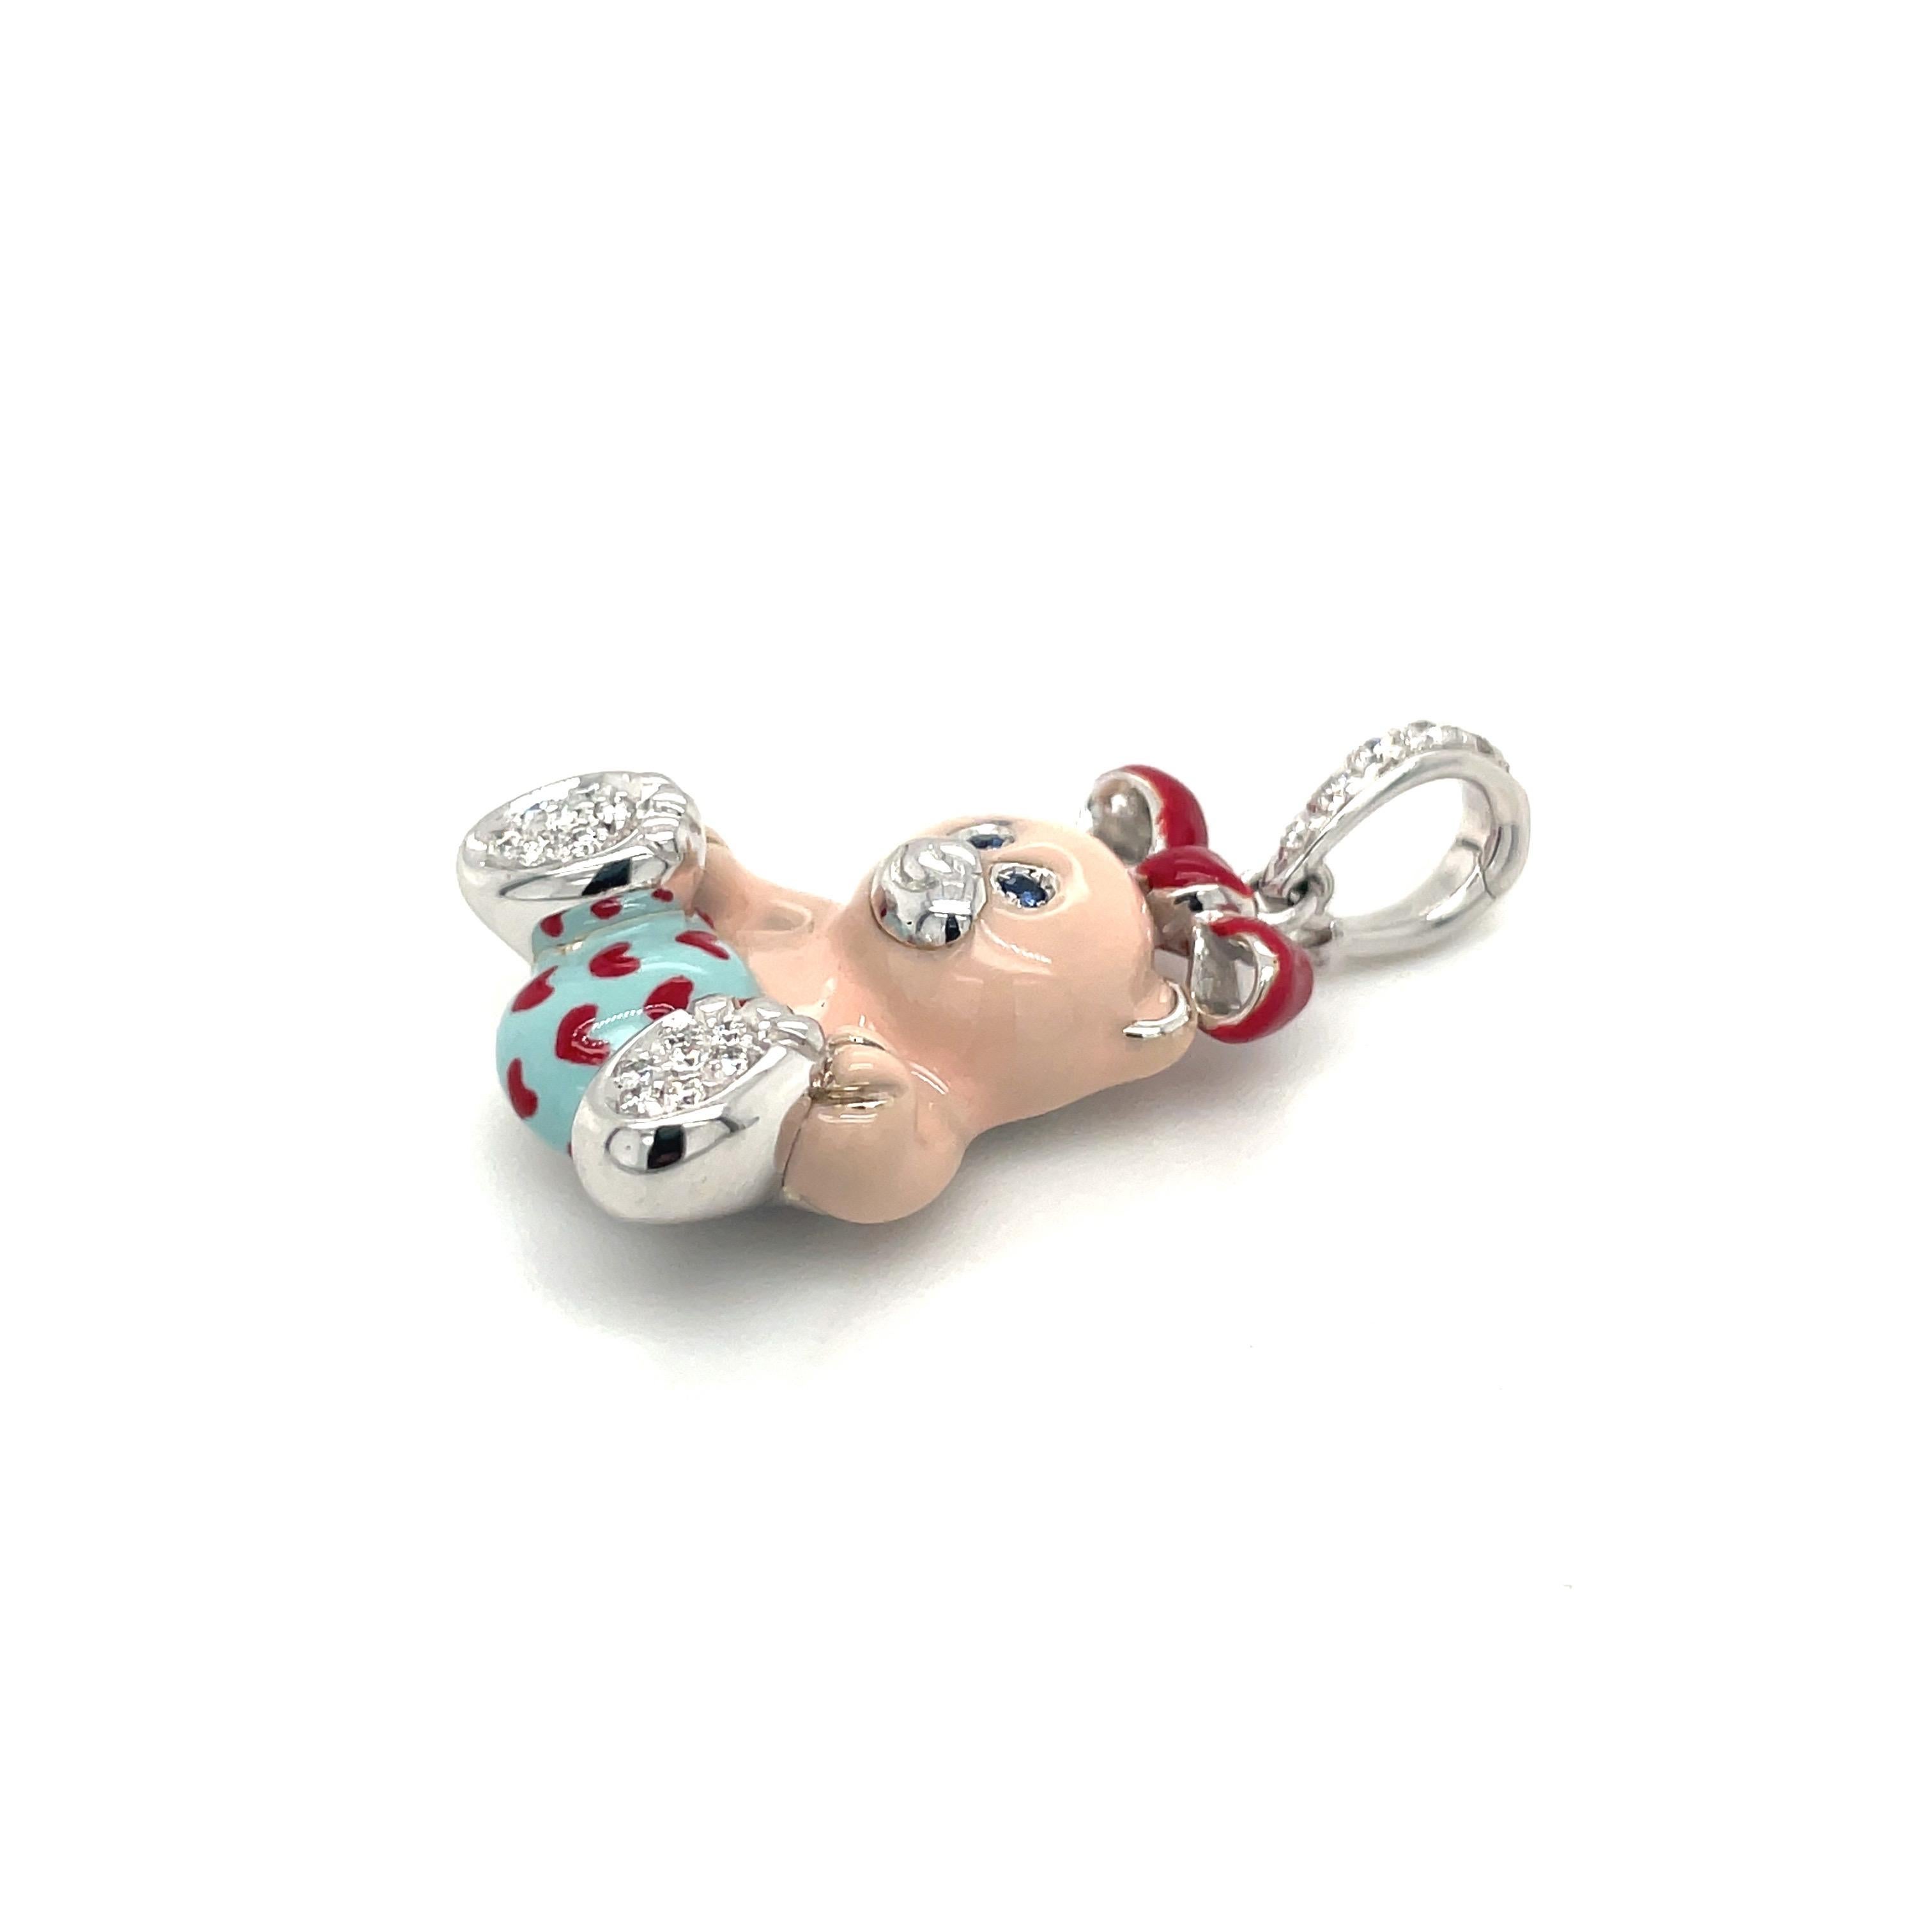 Just the cutest....Teddy bear charm made exclusively for Cellini by Ambrosi of Italy.

This 18 karat white gold teddy bear is set with round brilliant pave diamonds on her paws . She has blue sapphire eyes . Her body is light pink enamel and her